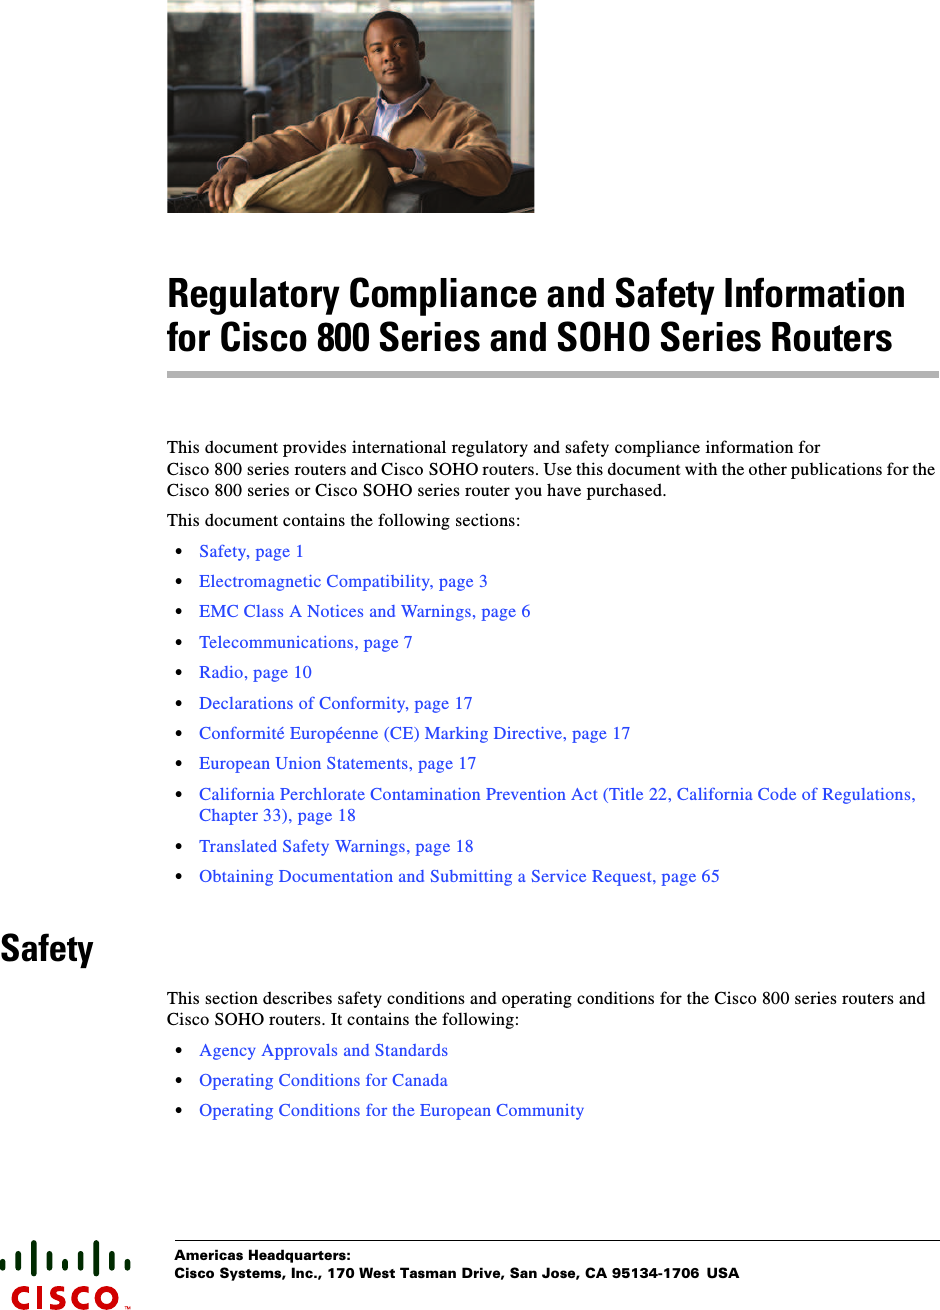  Americas Headquarters:Cisco Systems, Inc., 170 West Tasman Drive, San Jose, CA 95134-1706 USARegulatory Compliance and Safety Information for Cisco 800 Series and SOHO Series RoutersThis document provides international regulatory and safety compliance information for Cisco 800 series routers and Cisco SOHO routers. Use this document with the other publications for the Cisco 800 series or Cisco SOHO series router you have purchased.This document contains the following sections:•Safety, page 1•Electromagnetic Compatibility, page 3•EMC Class A Notices and Warnings, page 6•Telecommunications, page 7•Radio, page 10•Declarations of Conformity, page 17•Conformité Européenne (CE) Marking Directive, page 17•European Union Statements, page 17•California Perchlorate Contamination Prevention Act (Title 22, California Code of Regulations, Chapter 33), page 18•Translated Safety Warnings, page 18•Obtaining Documentation and Submitting a Service Request, page 65SafetyThis section describes safety conditions and operating conditions for the Cisco 800 series routers and Cisco SOHO routers. It contains the following:•Agency Approvals and Standards•Operating Conditions for Canada•Operating Conditions for the European Community